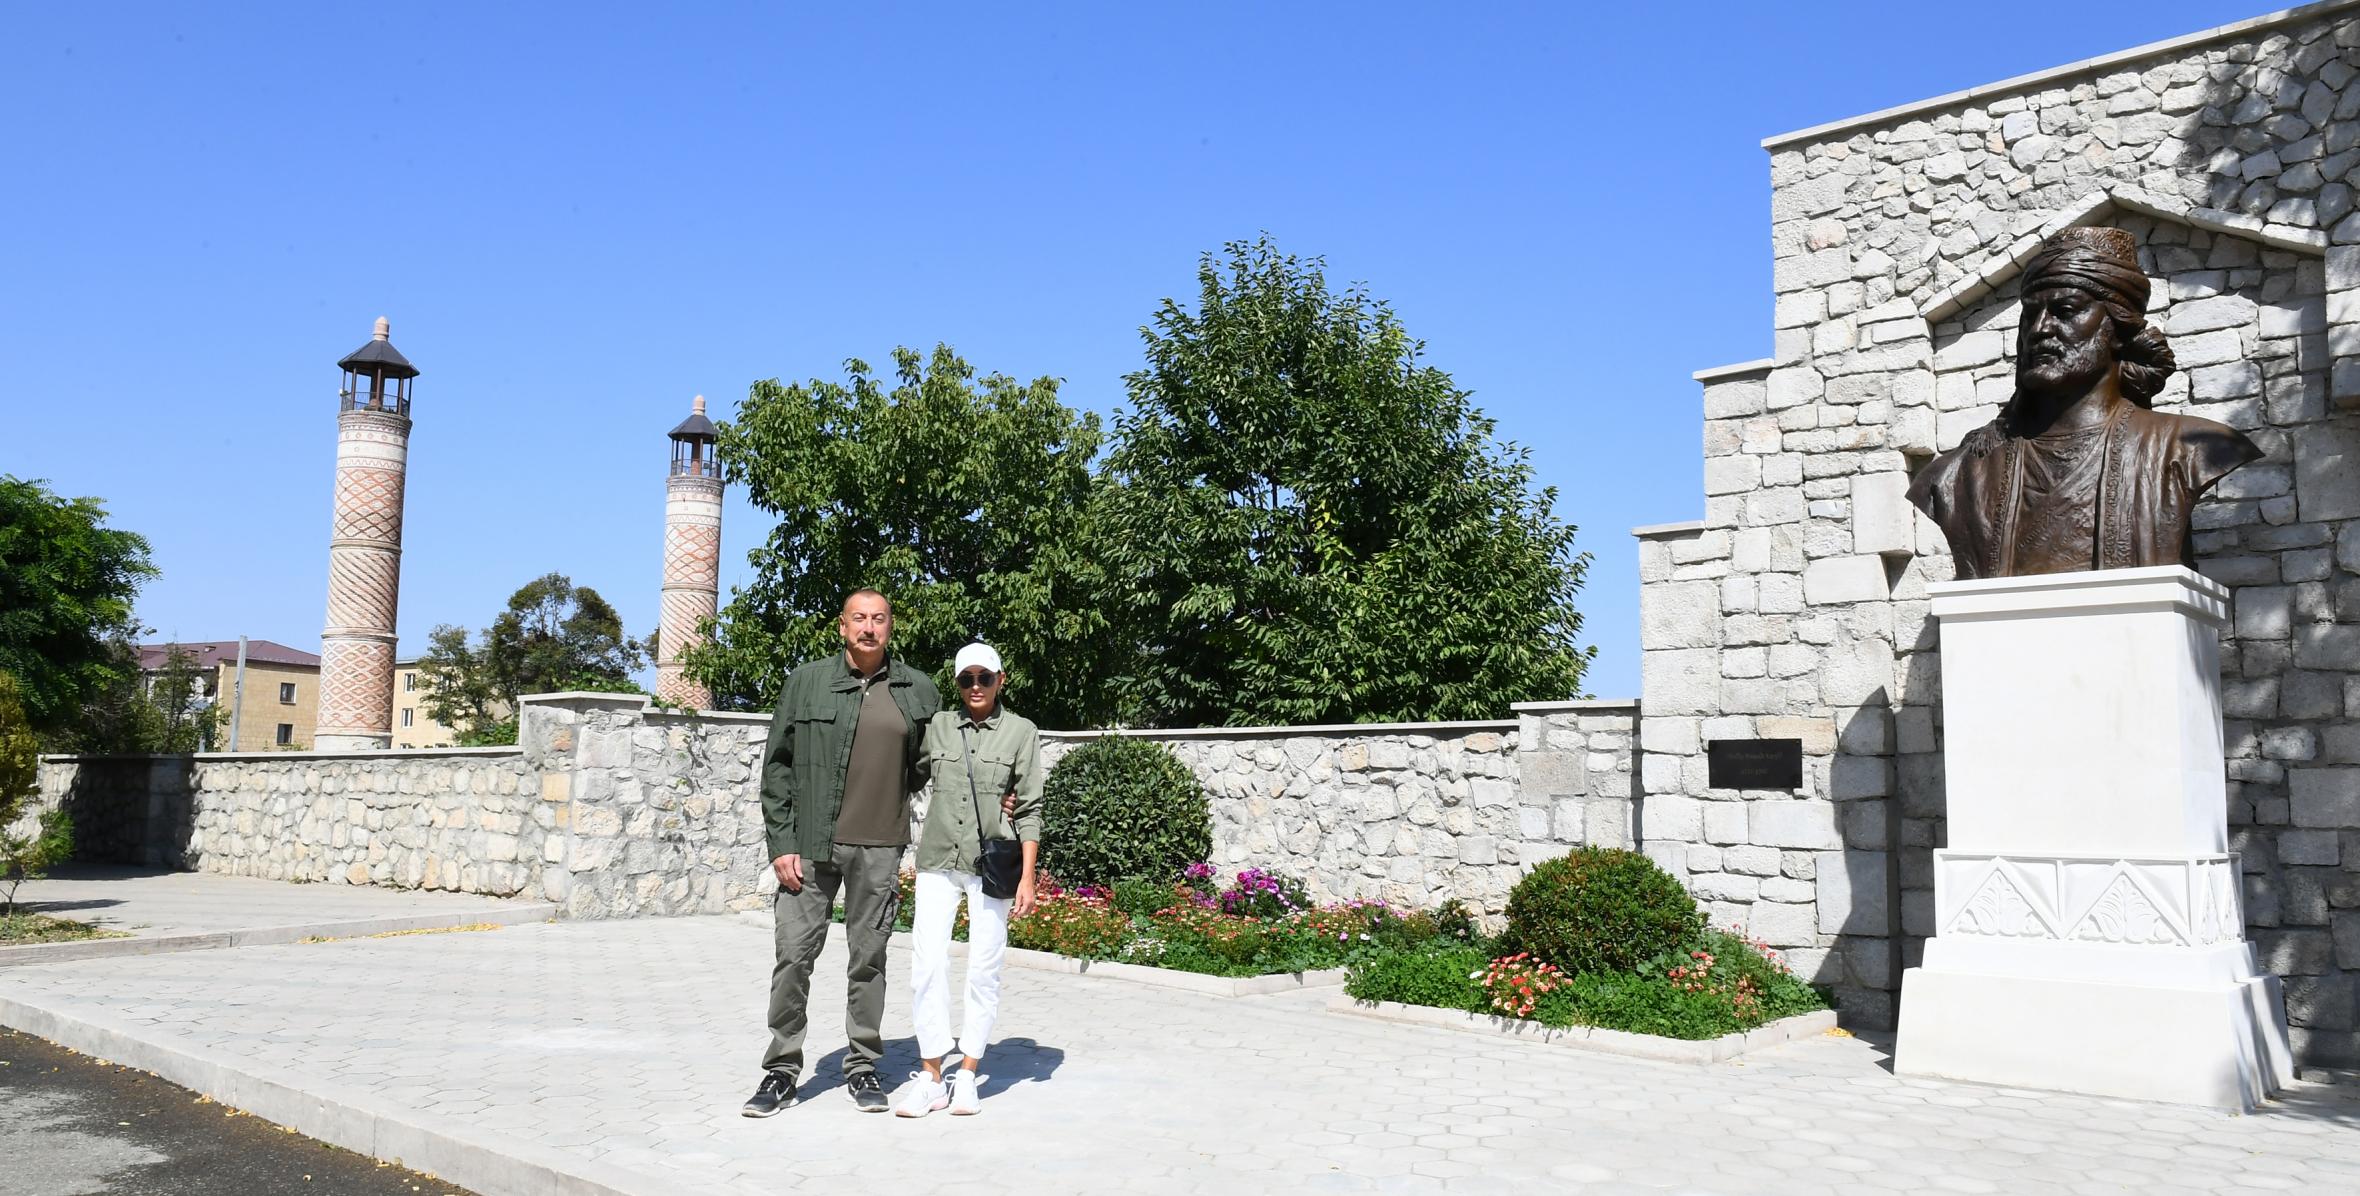 Ilham Aliyev and First Lady Mehriban Aliyeva attended the ceremony of unveiling the bust to great Azerbaijani poet Molla Penah Vagif in Shusha